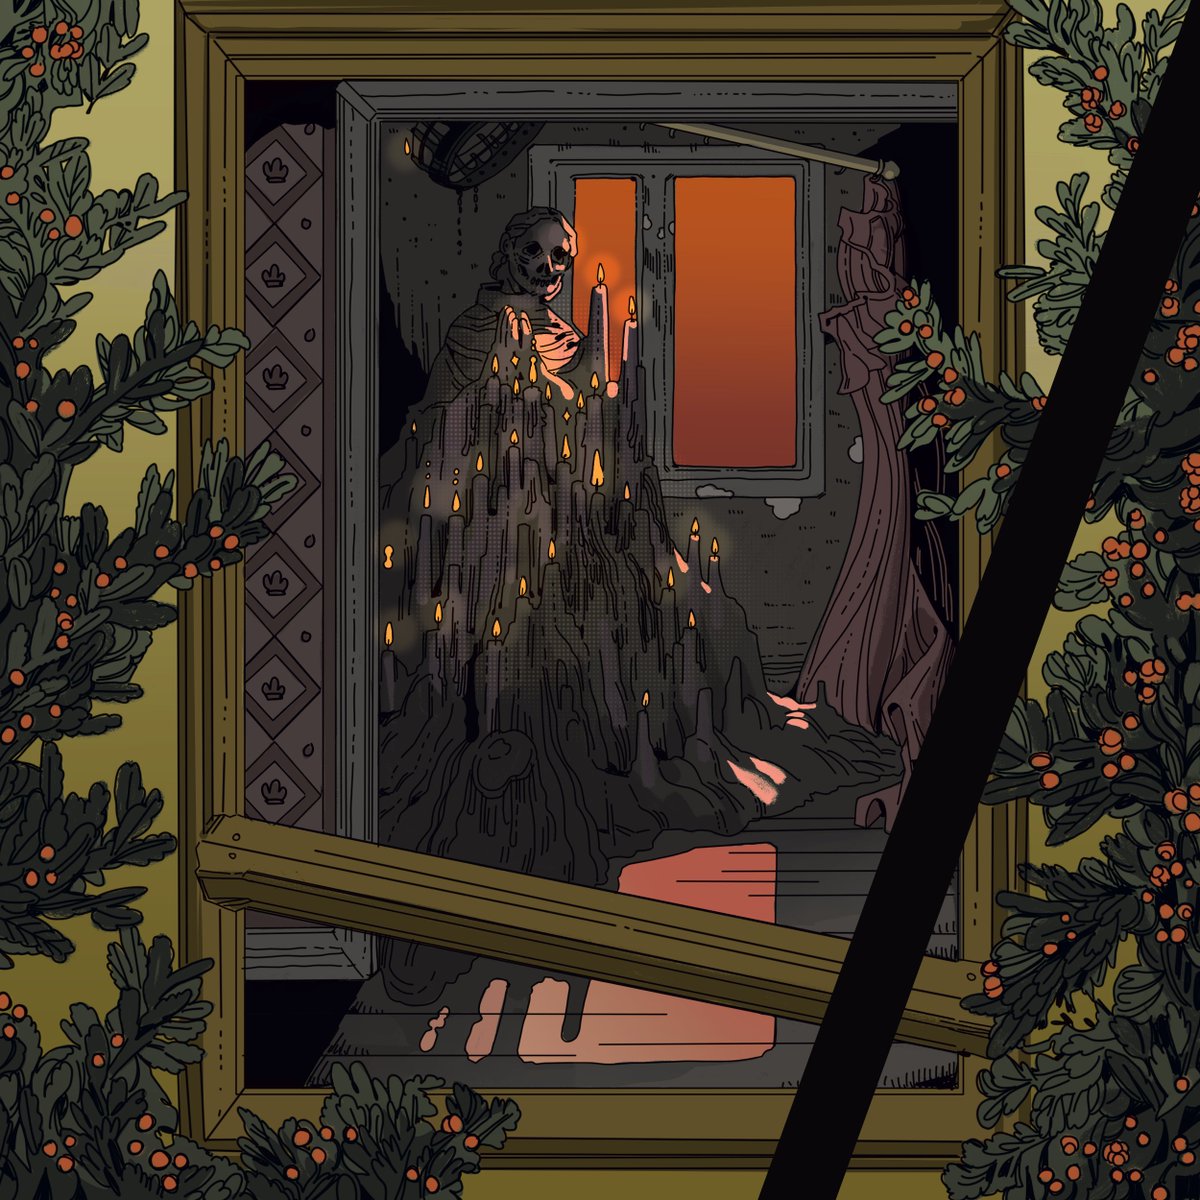 「be wary of the old houses in the foothil」|beth fuller✨のイラスト